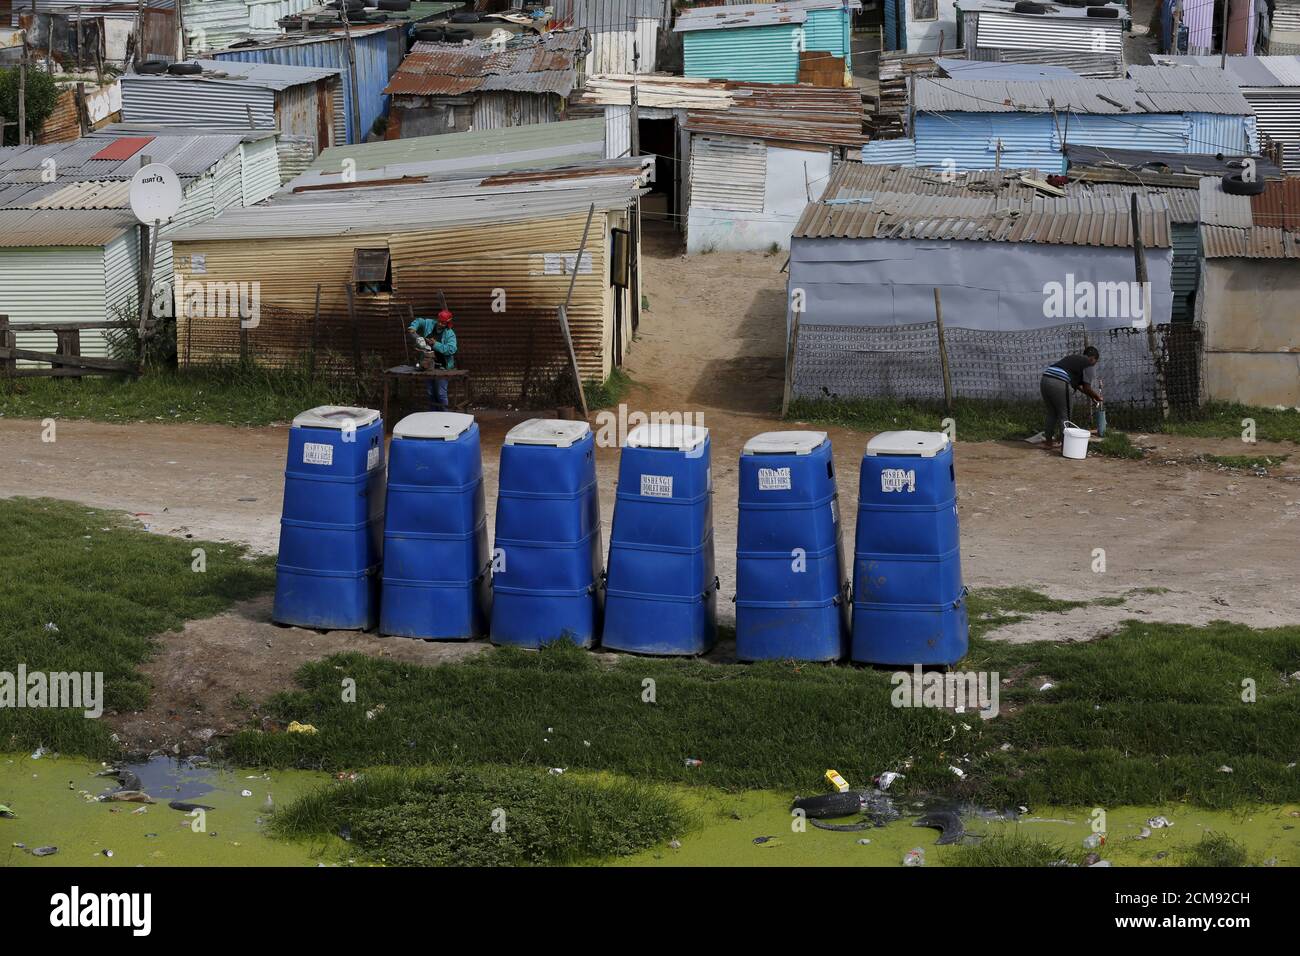 Temporary toilets stand in front of shacks in Khayelitsha township, Cape Town, South Africa, October 14, 2015. Twenty years after South Africa's first democratic elections, the slow pace of delivery of basic services remains a point of tension in some communities. Some 2.4 billion people around the world don't have access to decent sanitation and more than a billion are forced to defecate in the open, risking disease and other dangers, according to the United Nations. The UN says that while there is sufficient fresh water on the planet for everyone, 'bad economics and poor infrastructure' mean Stock Photo